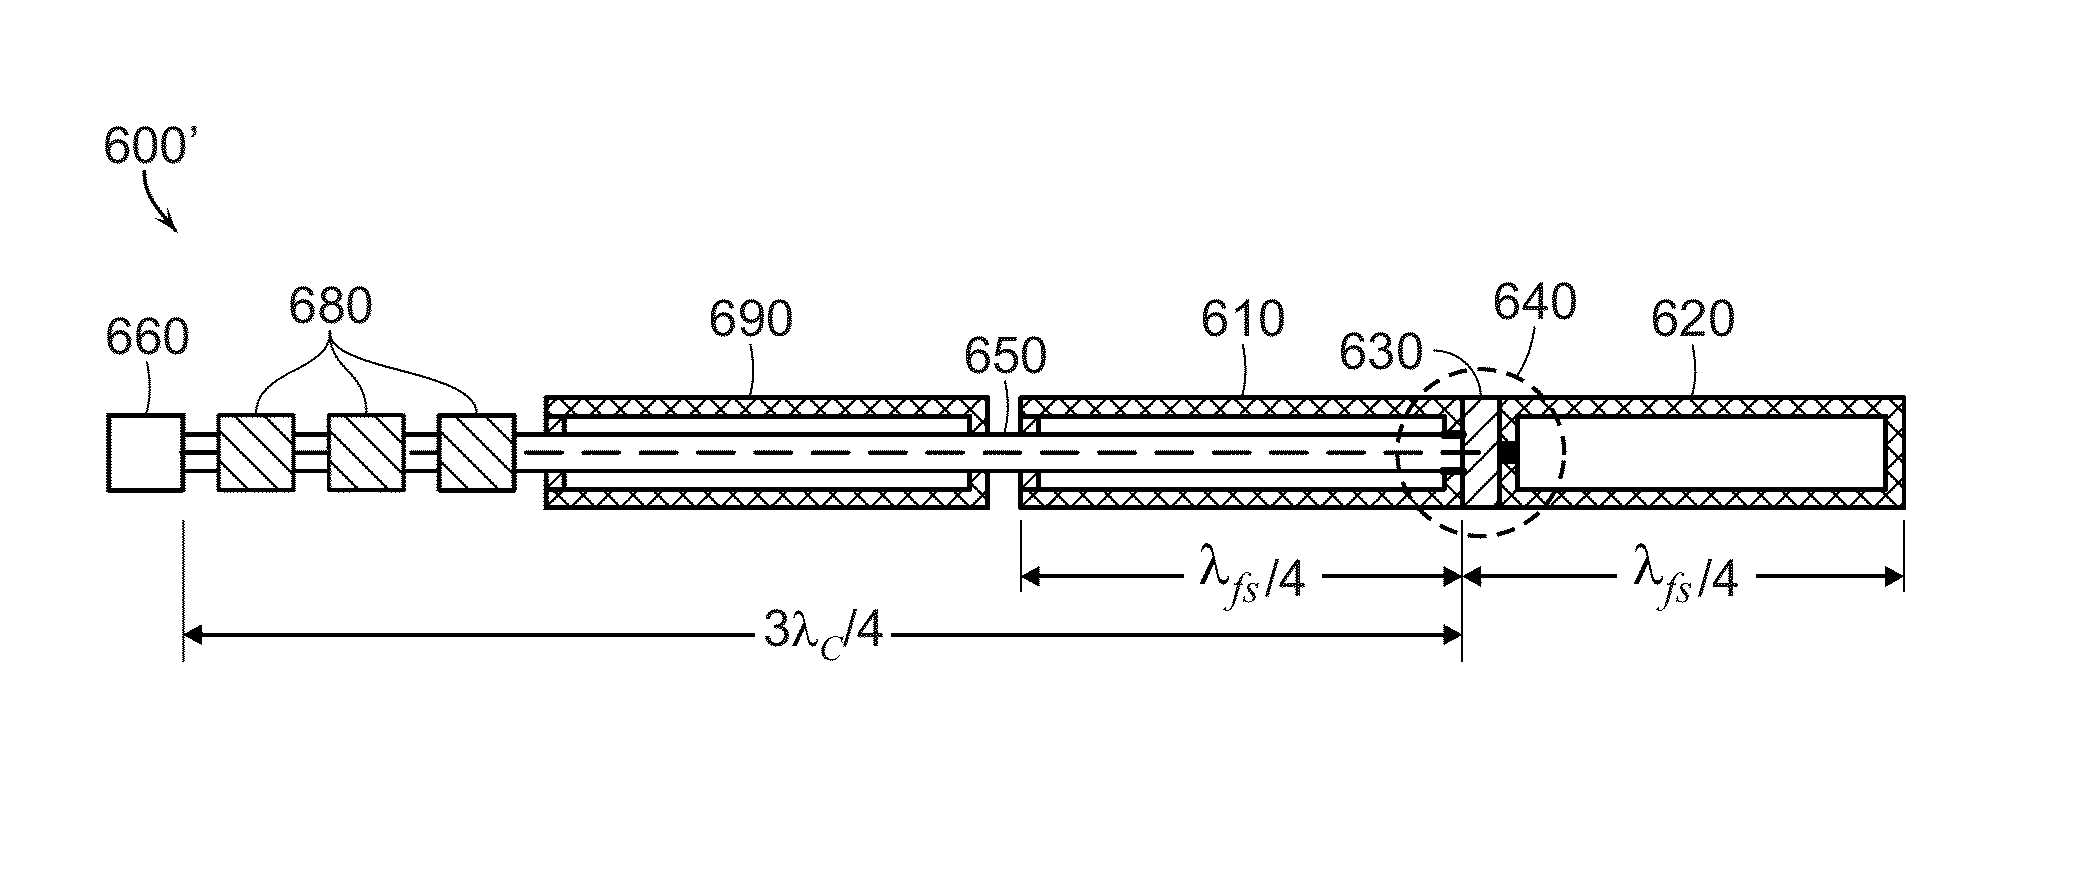 End-fed sleeve dipole antenna comprising a ¾-wave transformer